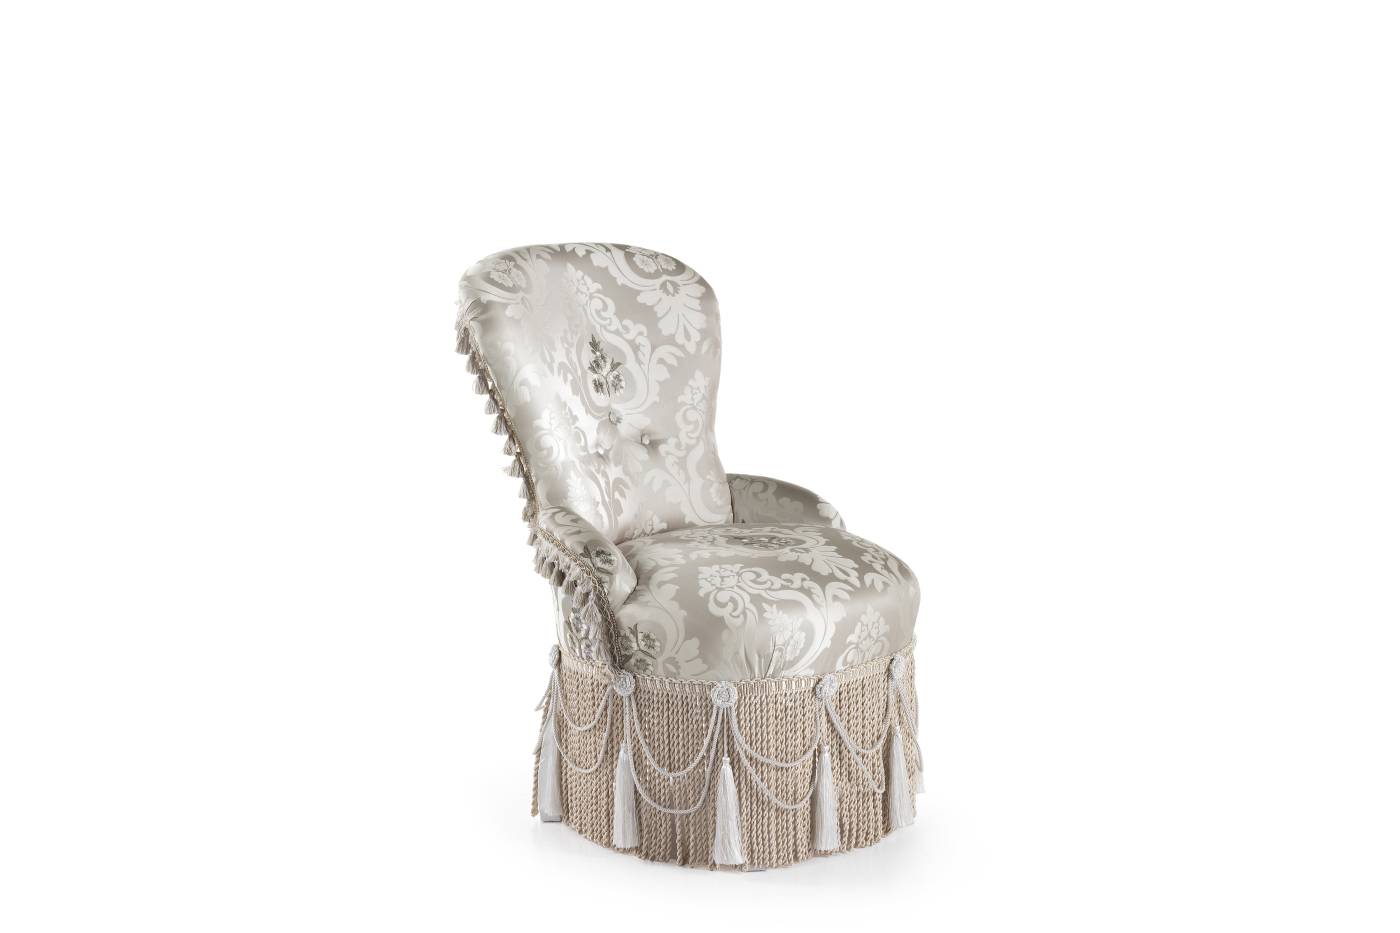 SCARLETT armchair - A luxury experience with the Domus collection and its classic luxurious furniture